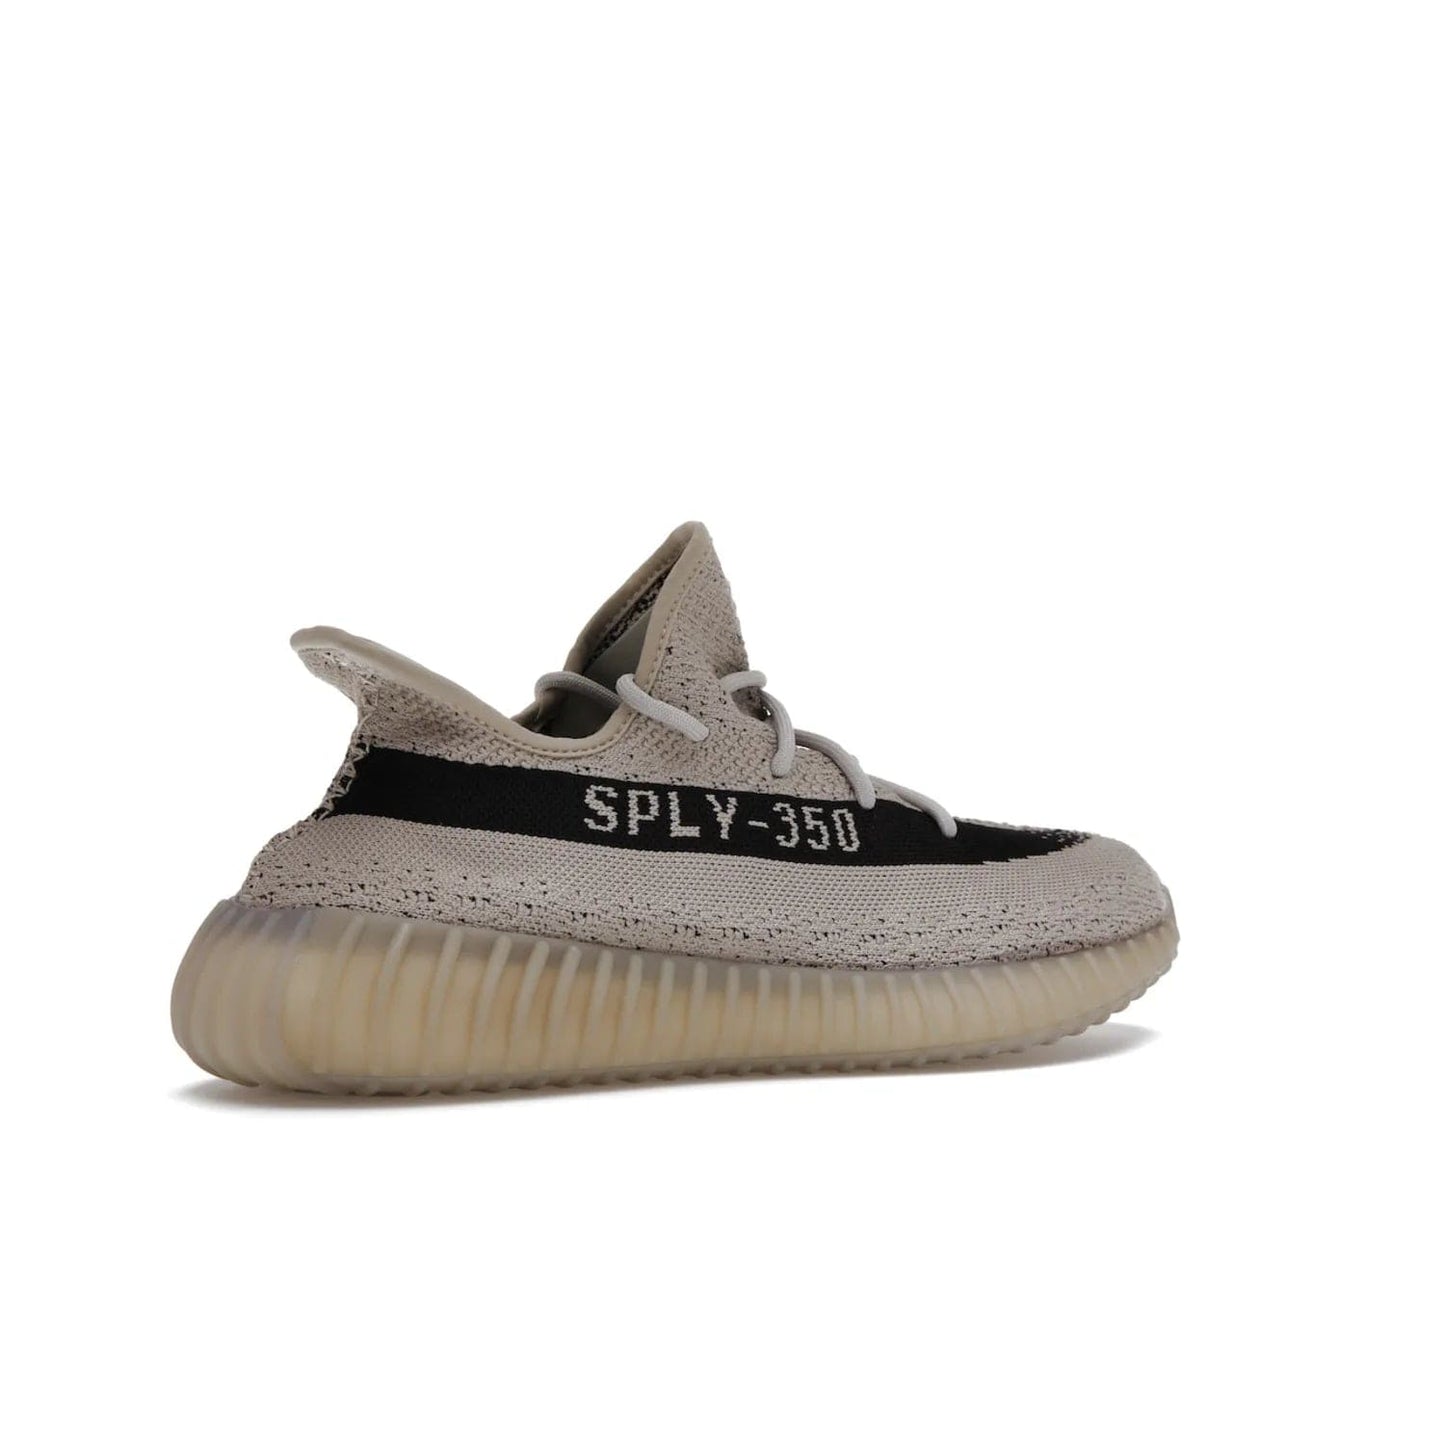 adidas Yeezy Boost 350 V2 Slate - Image 34 - Only at www.BallersClubKickz.com - Adidas Yeezy Boost 350 V2 Slate Core Black Slate featuring Primeknit upper, Boost midsole and semi-translucent TPU cage. Launched on 3/9/2022, retailed at $230.